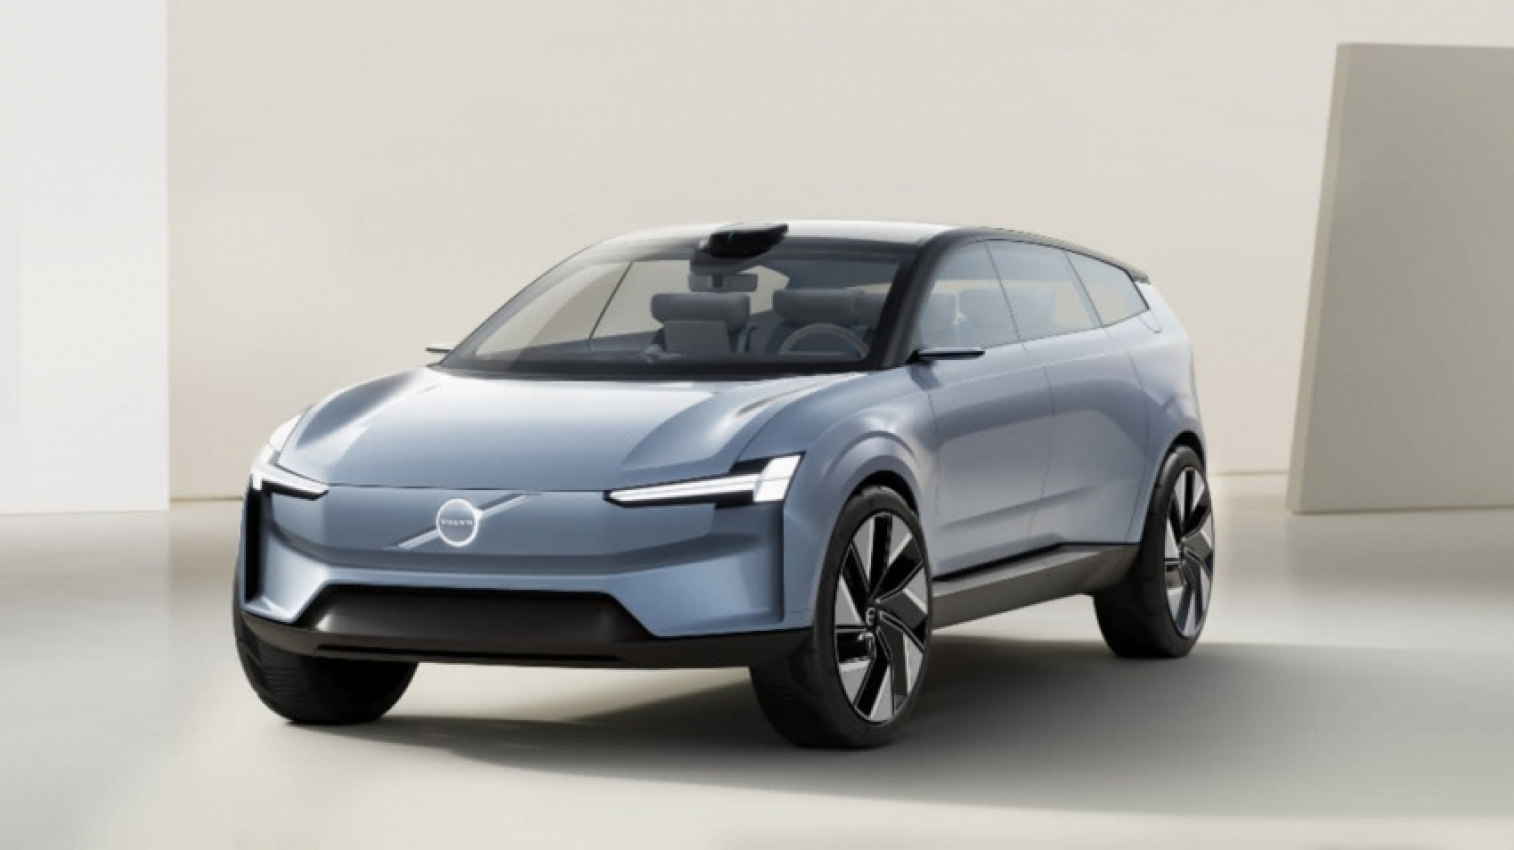 audi, autos, bmw, cars, volvo, audi e-tron, electric cars, industry news, showroom news, volvo news, volvo suv range, volvo wagon range, volvo xc60, volvo xc60 2022, volvo xc90, volvo xc90 2022, make room! new electric crossover to slot in between volvo xc60 and xc90 suvs in 2024 to rival bmw ix, audi e-tron - report